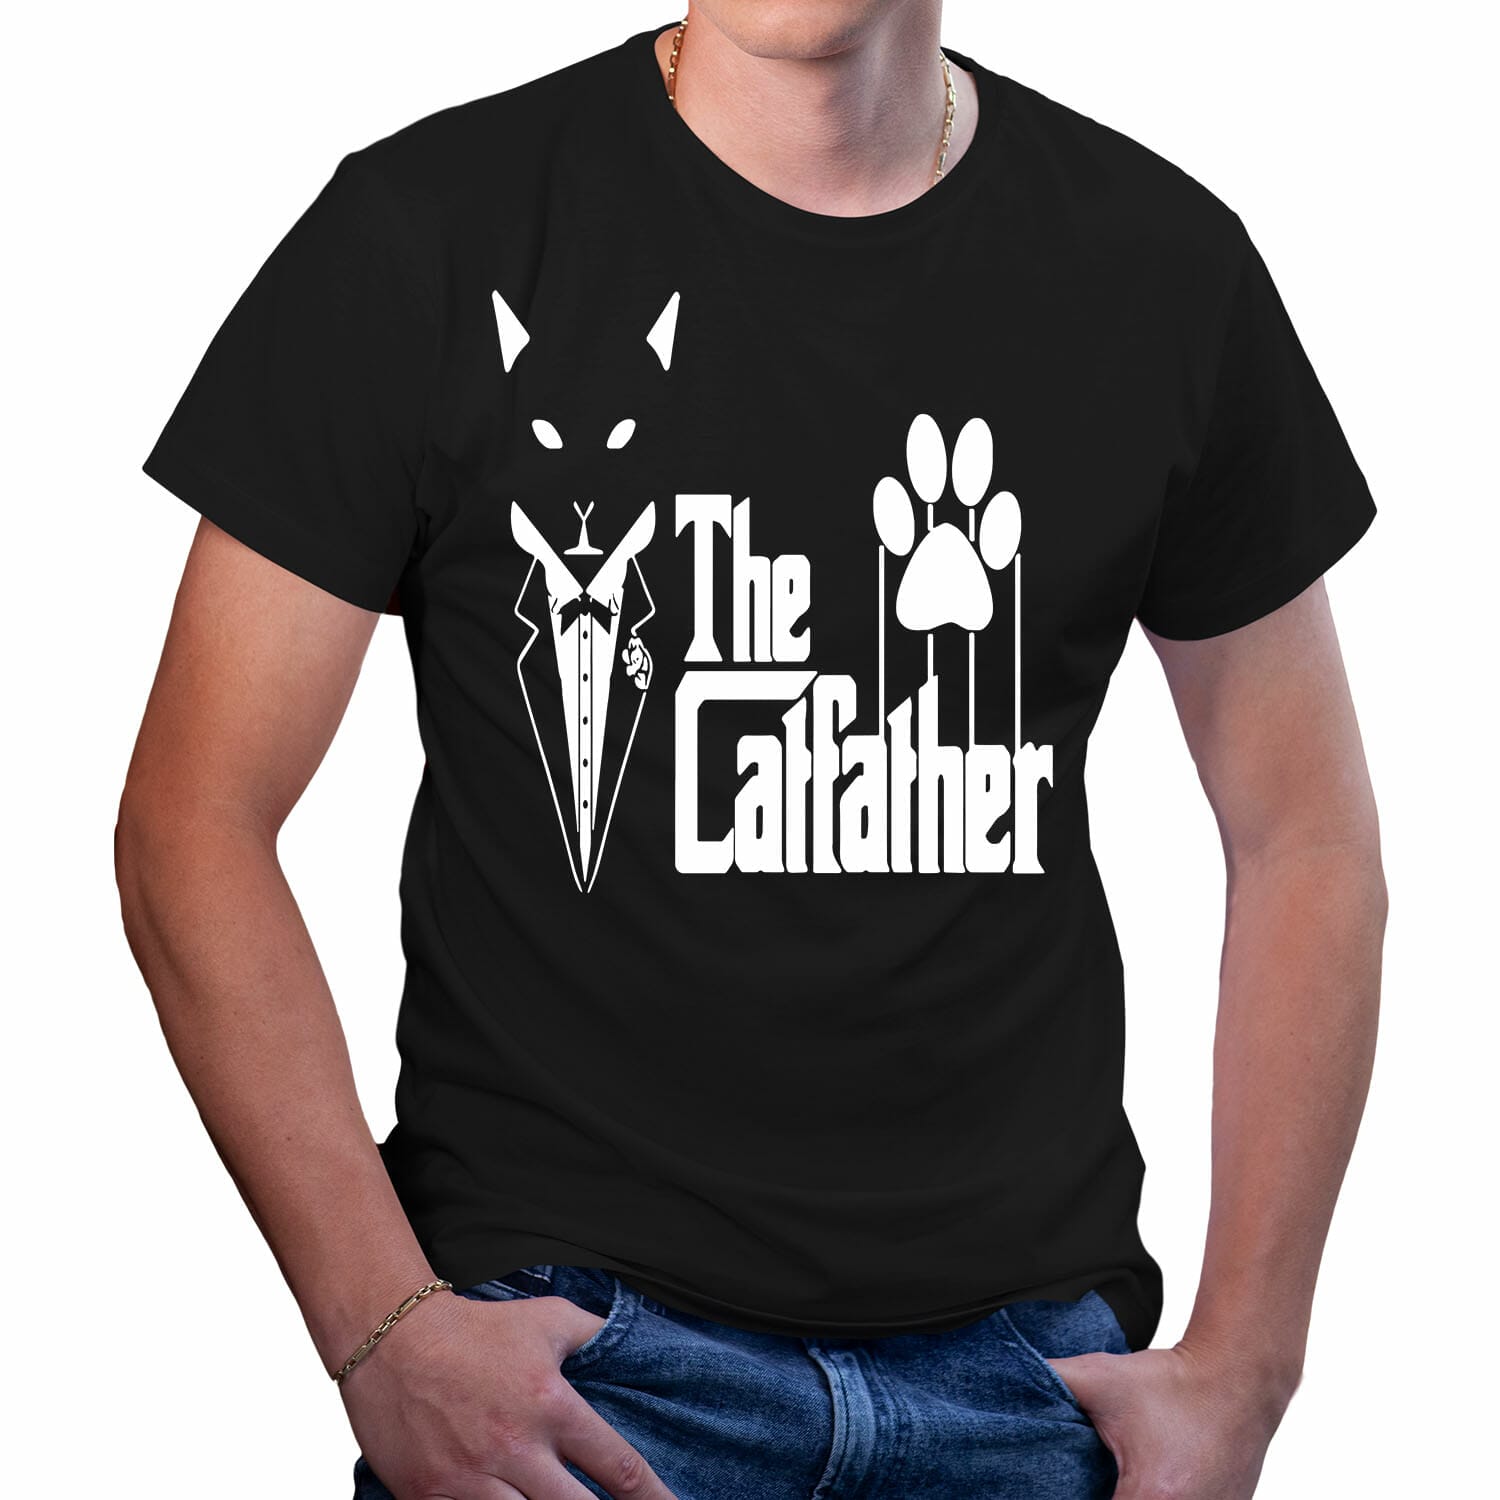 The Cat Father Tshirt Design for men